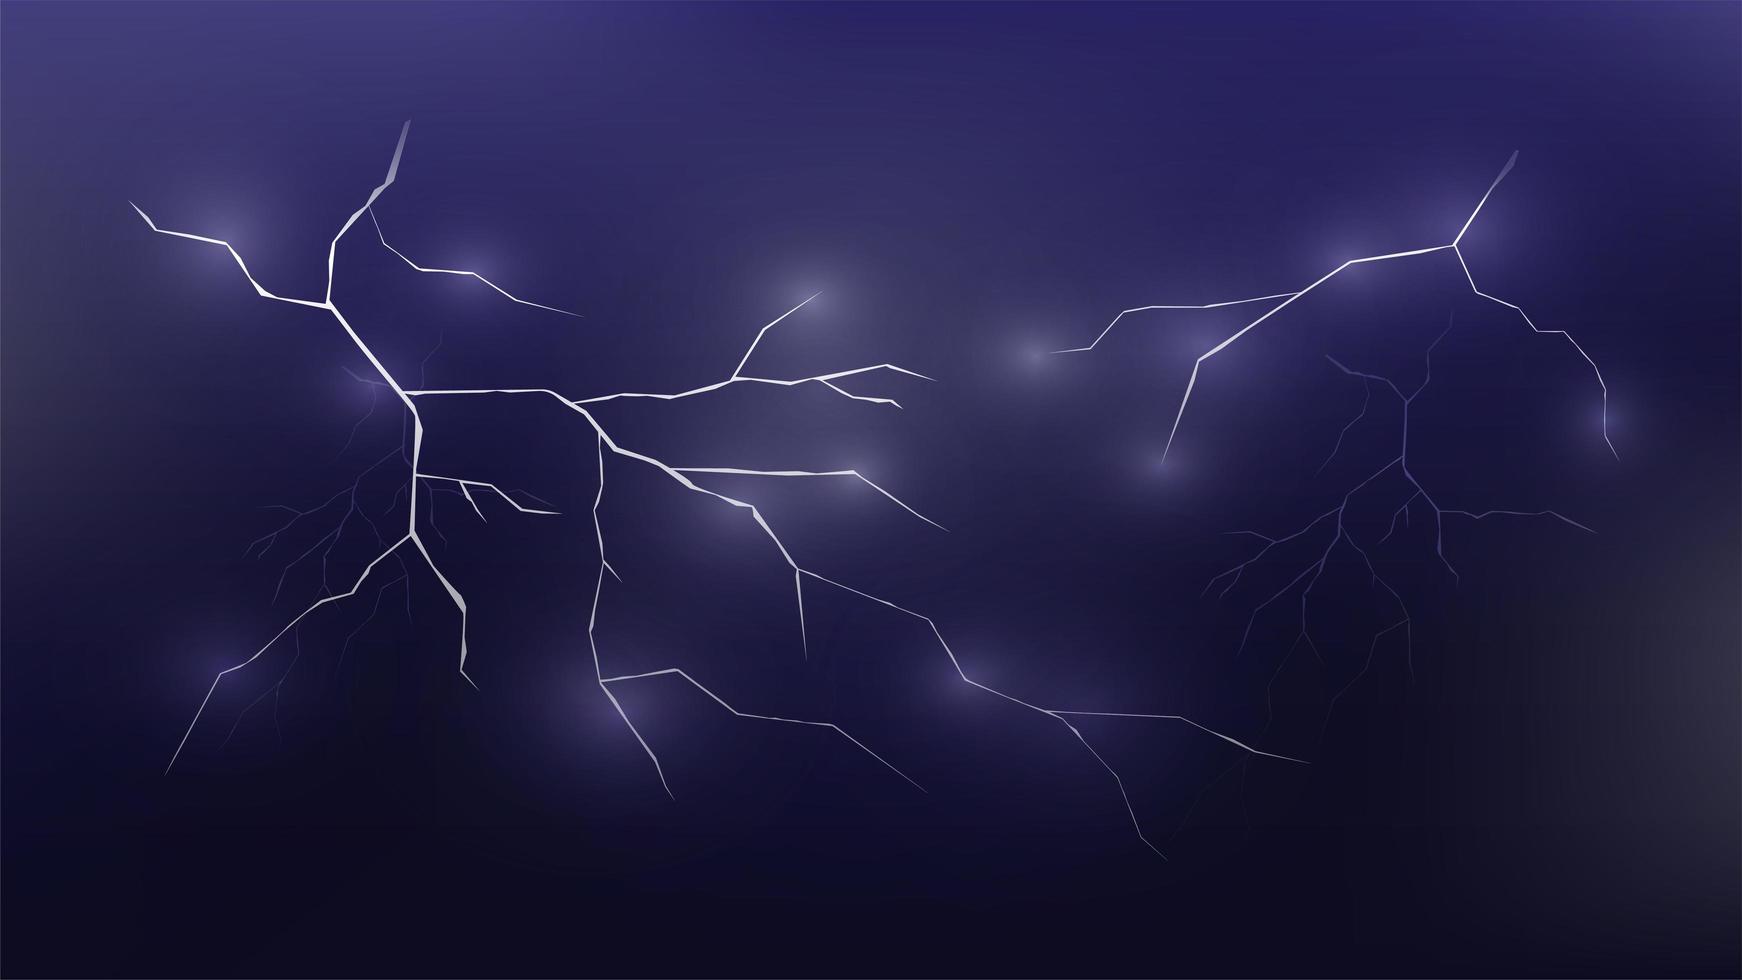 Lightning in the clouds vector